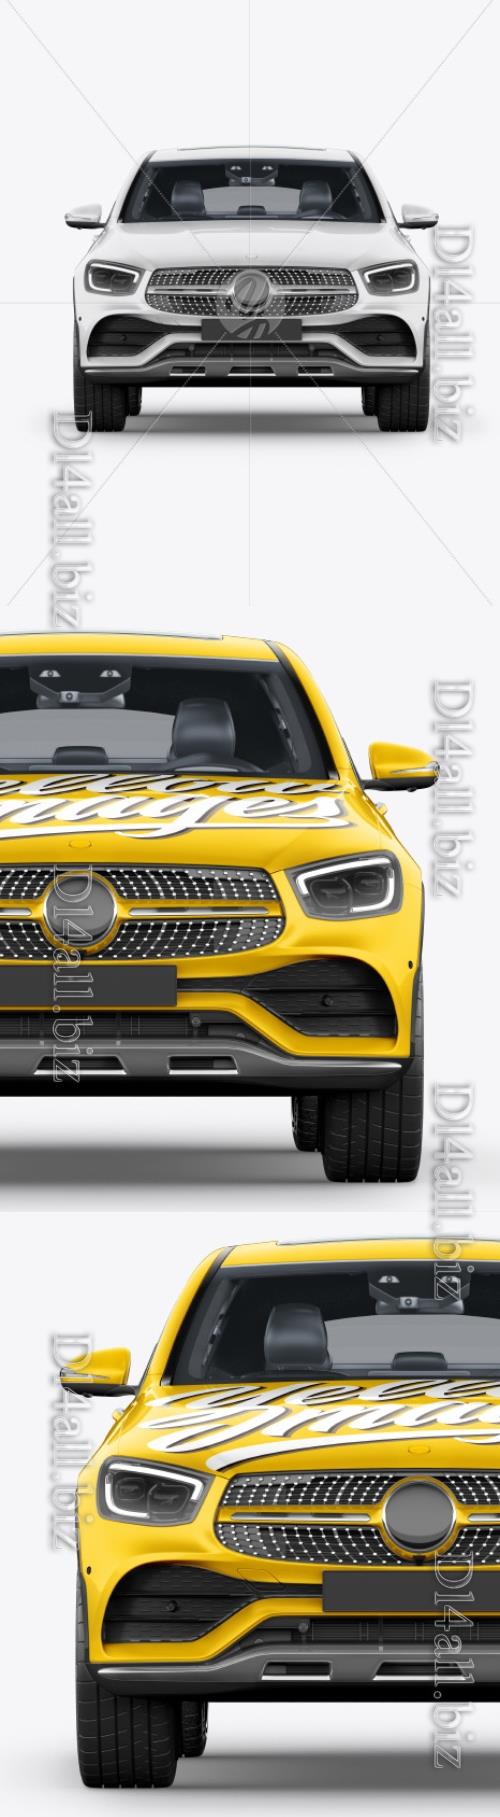 Coupe Crossover SUV Mockup - Front View 48142